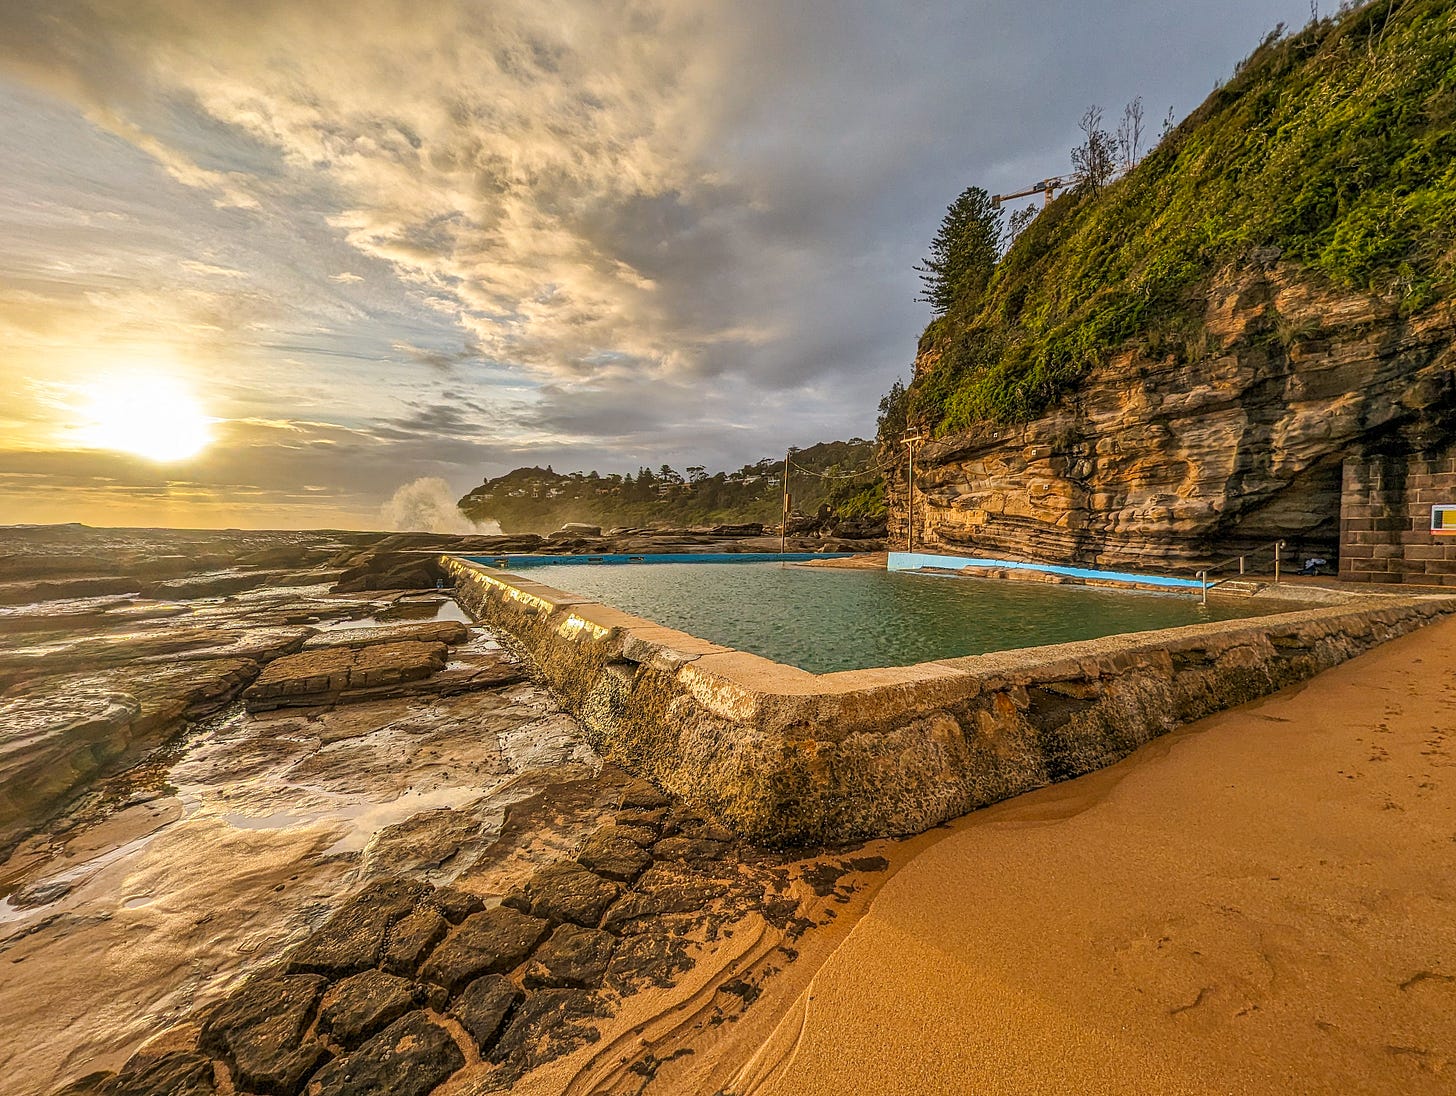 Whale Beach rock pool at sunrise. Water is calm and green. 